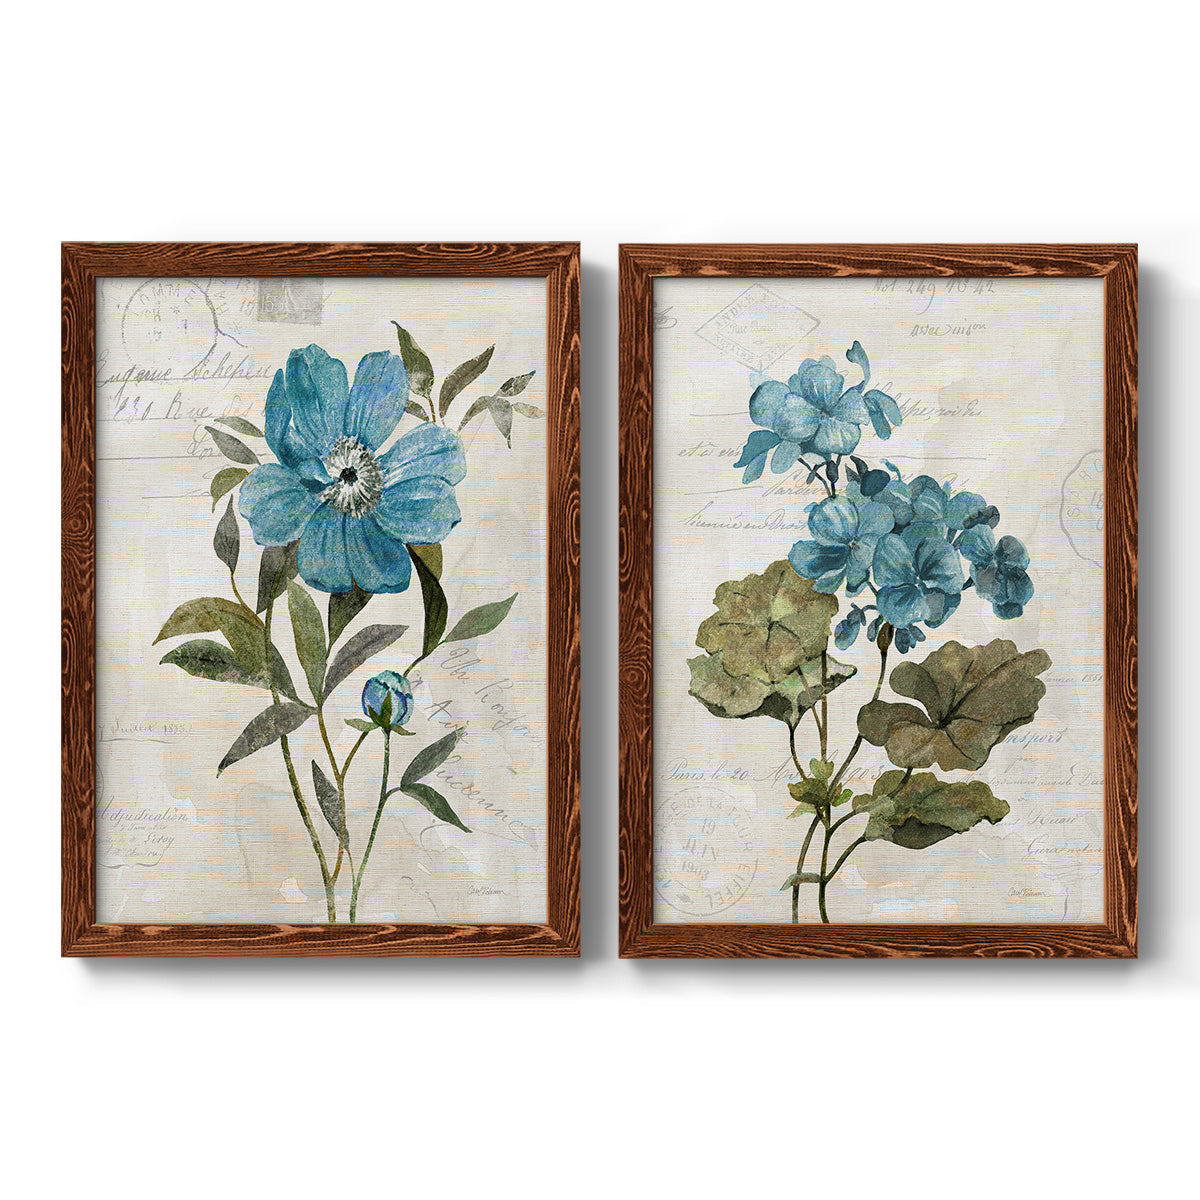 Linen Peony - Premium Framed Canvas 2 Piece Set - Ready to Hang